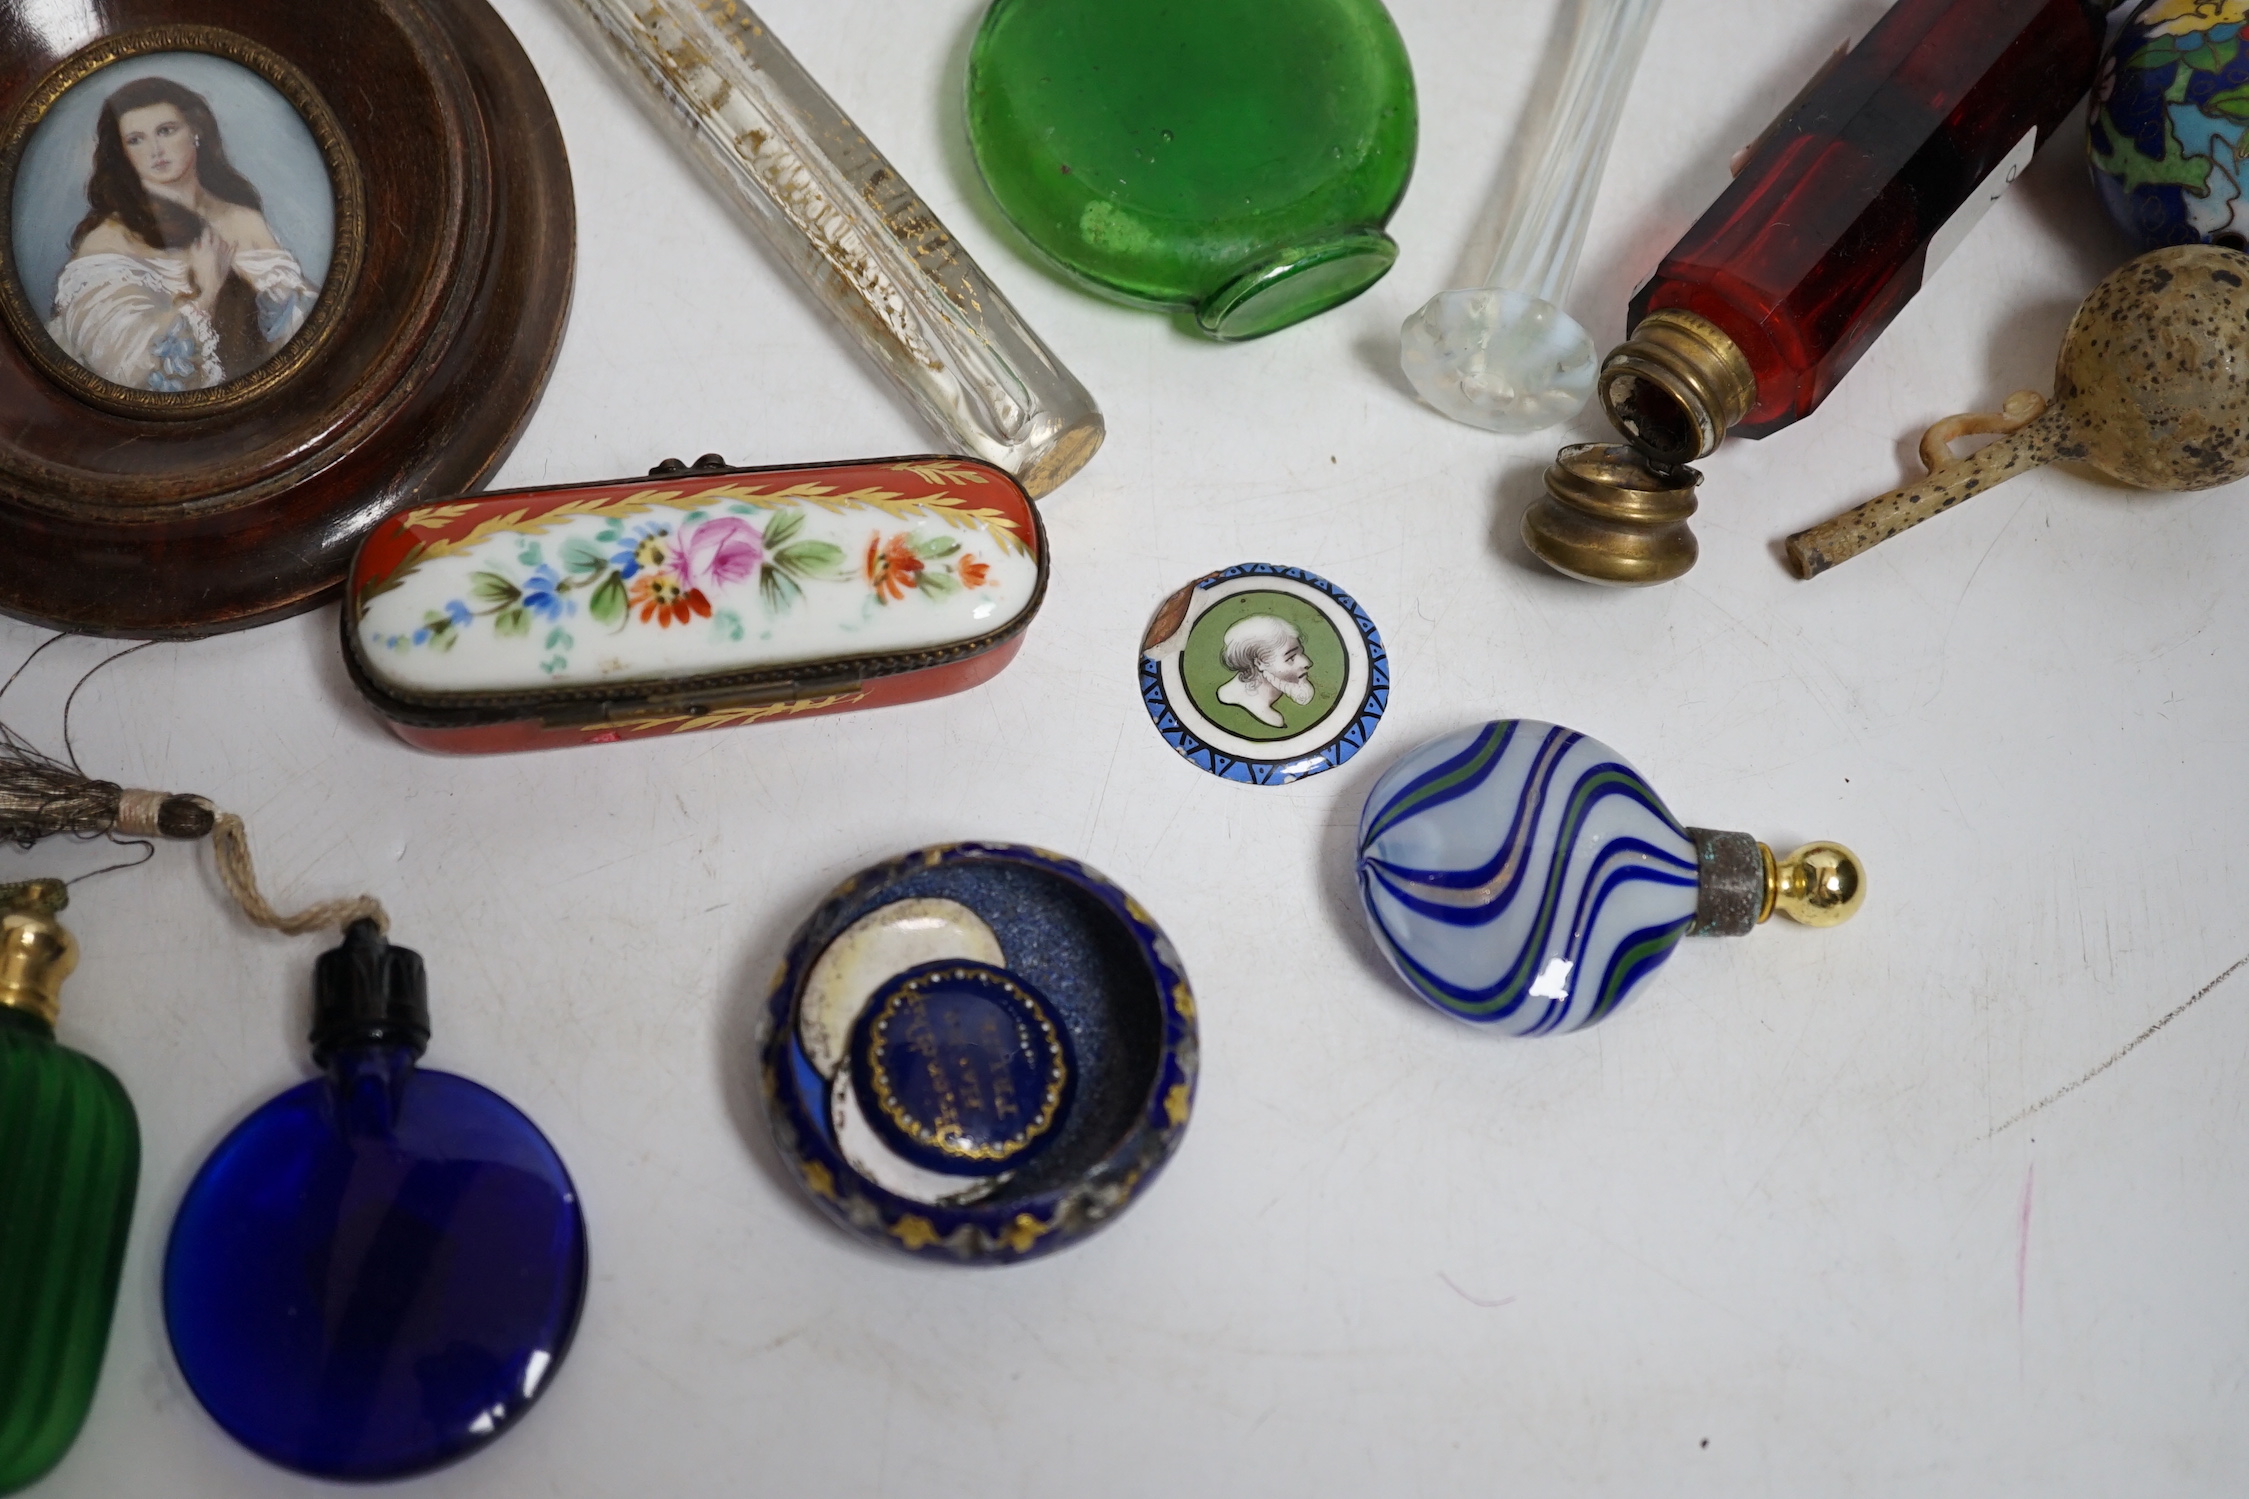 A collection of scent bottles, a miniature antiquity vessel and a miniature of a lady